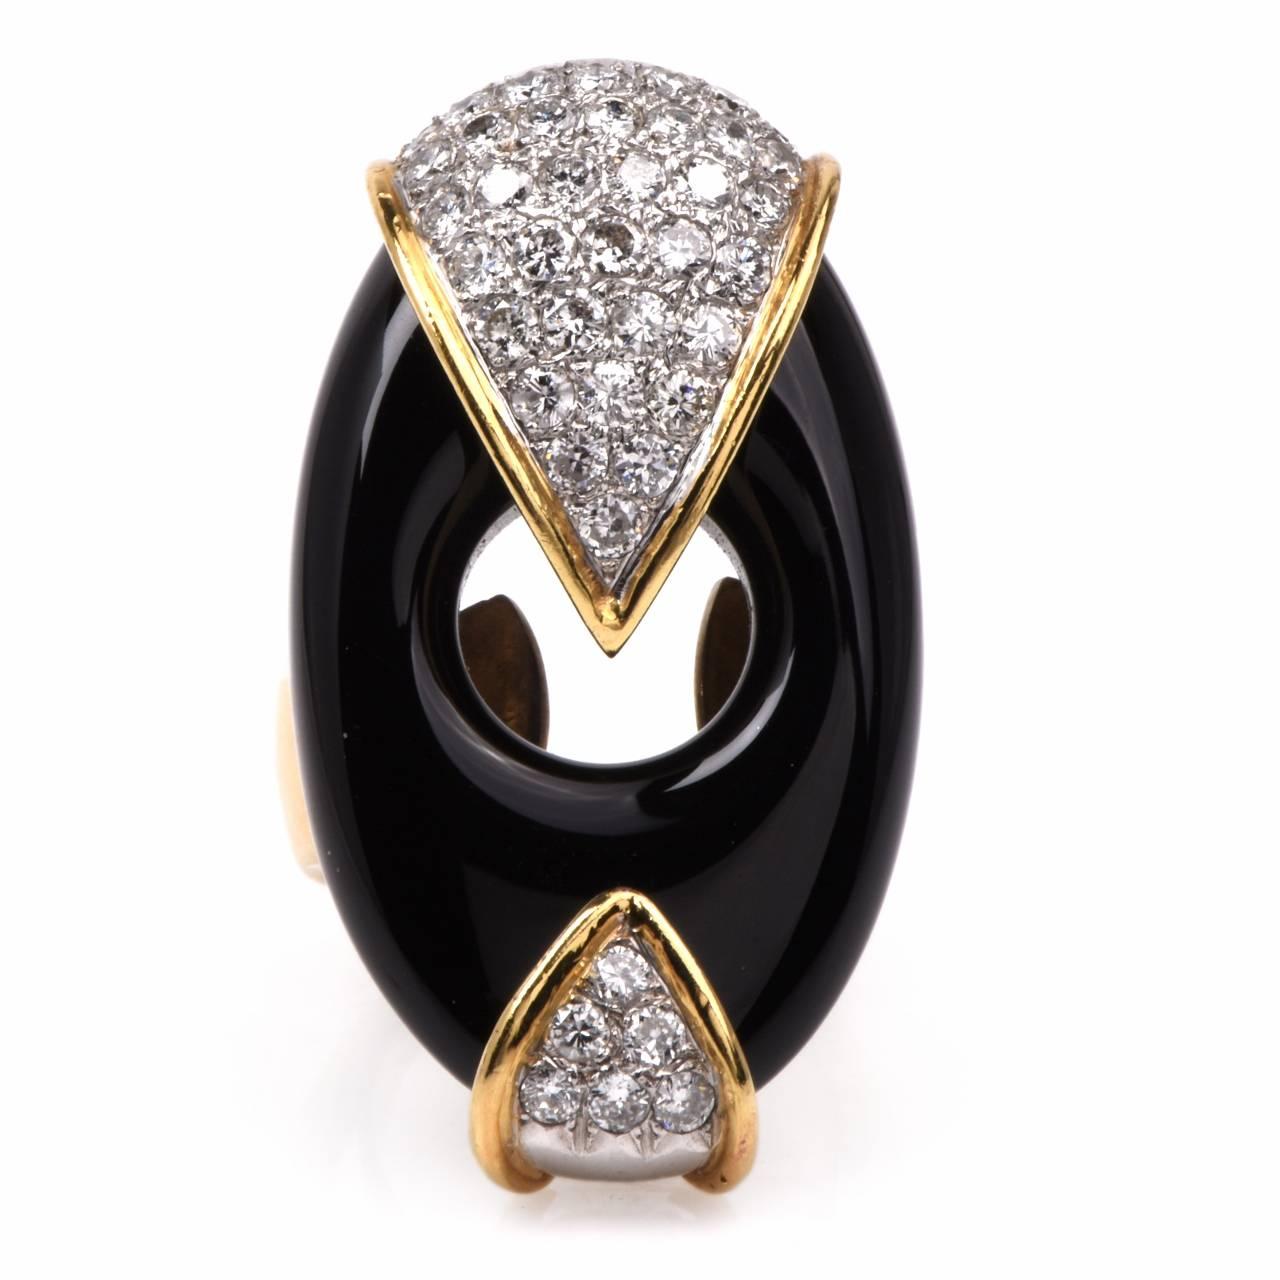 This stylish retro Italian diamond and black onyx large cocktail ring is set in 18K yellow gold, weighing approx: 24.6 grams and measuring approx: 37mm x 21mm. Embellishing the top and bottom of this antique cocktail ring is a wrap of yellow gold